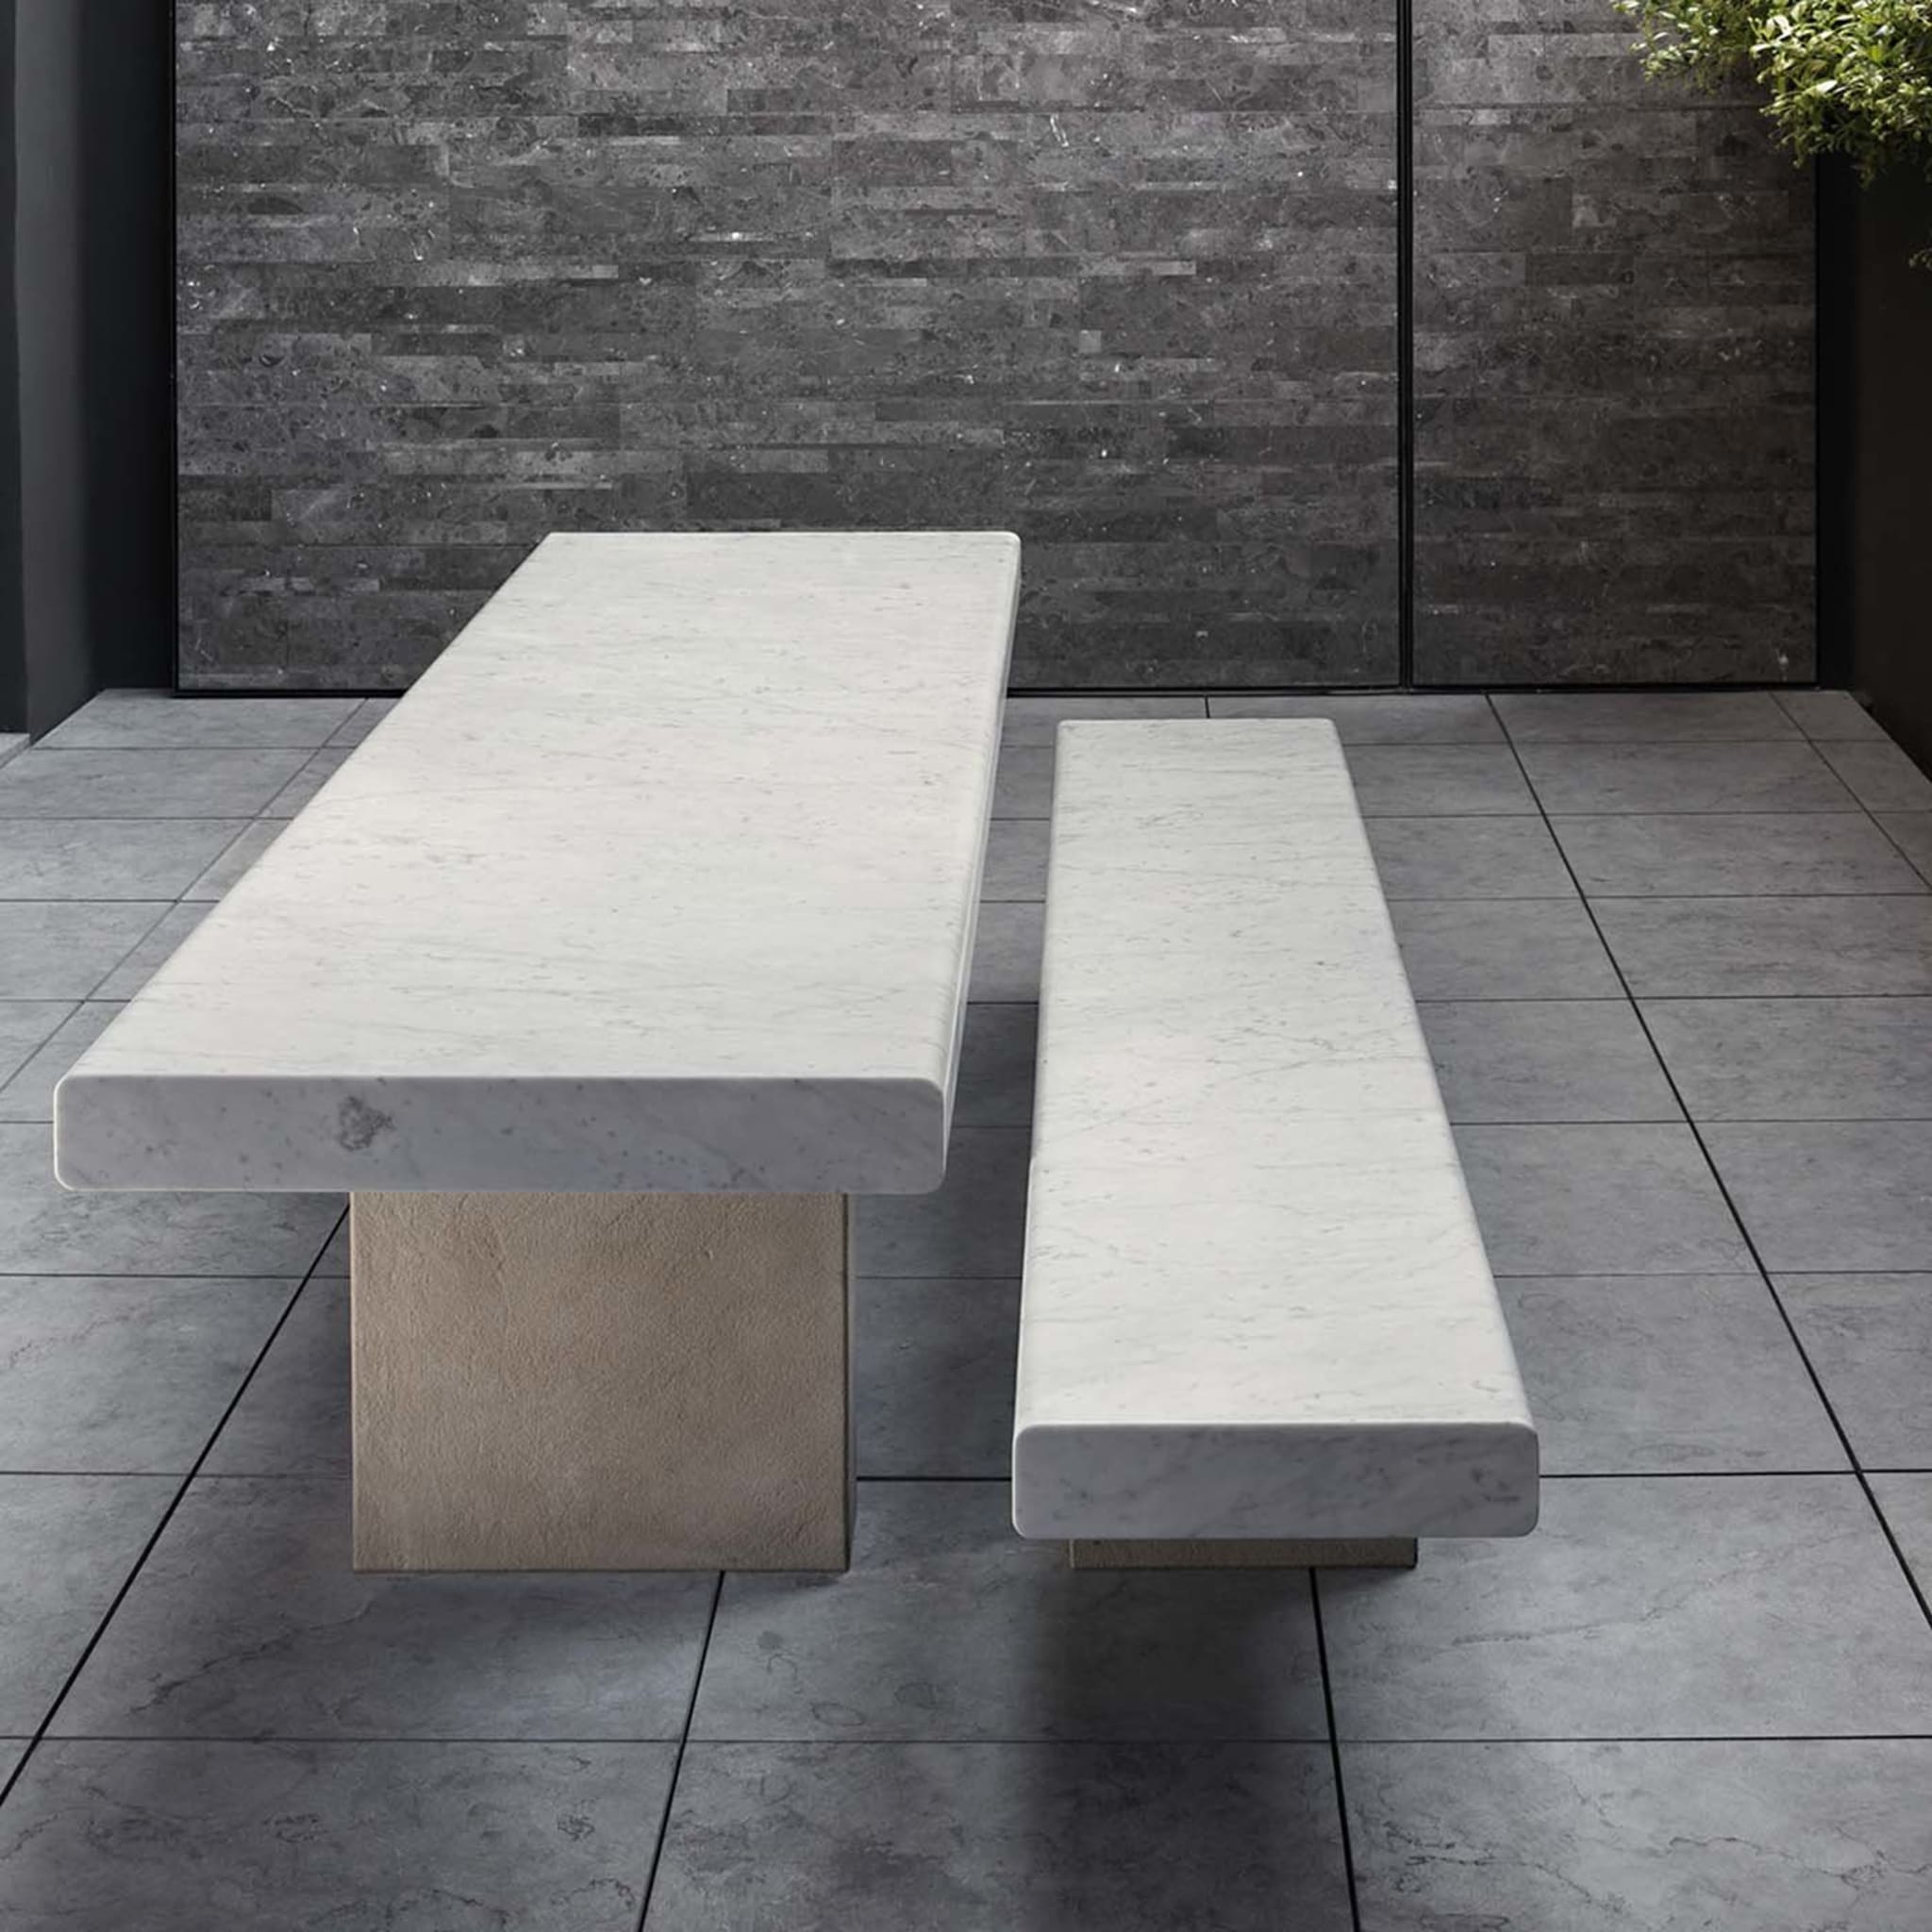 Span Outdoor Bench by John Pawson - Alternative view 2